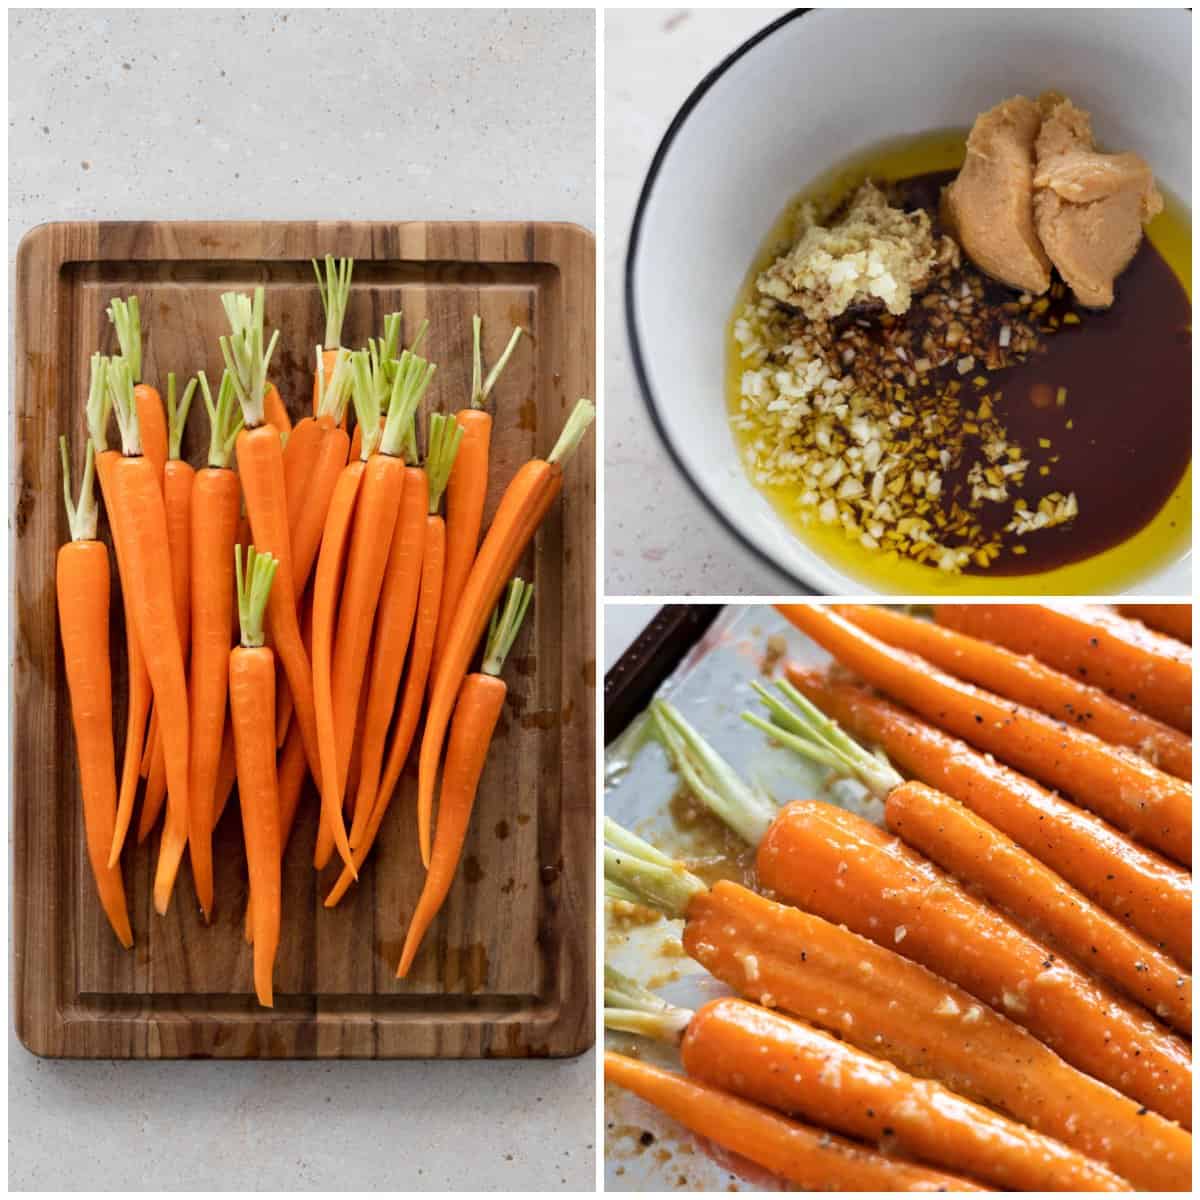 Three process photos showing cut carrots, making glaze and glazed carrots. 